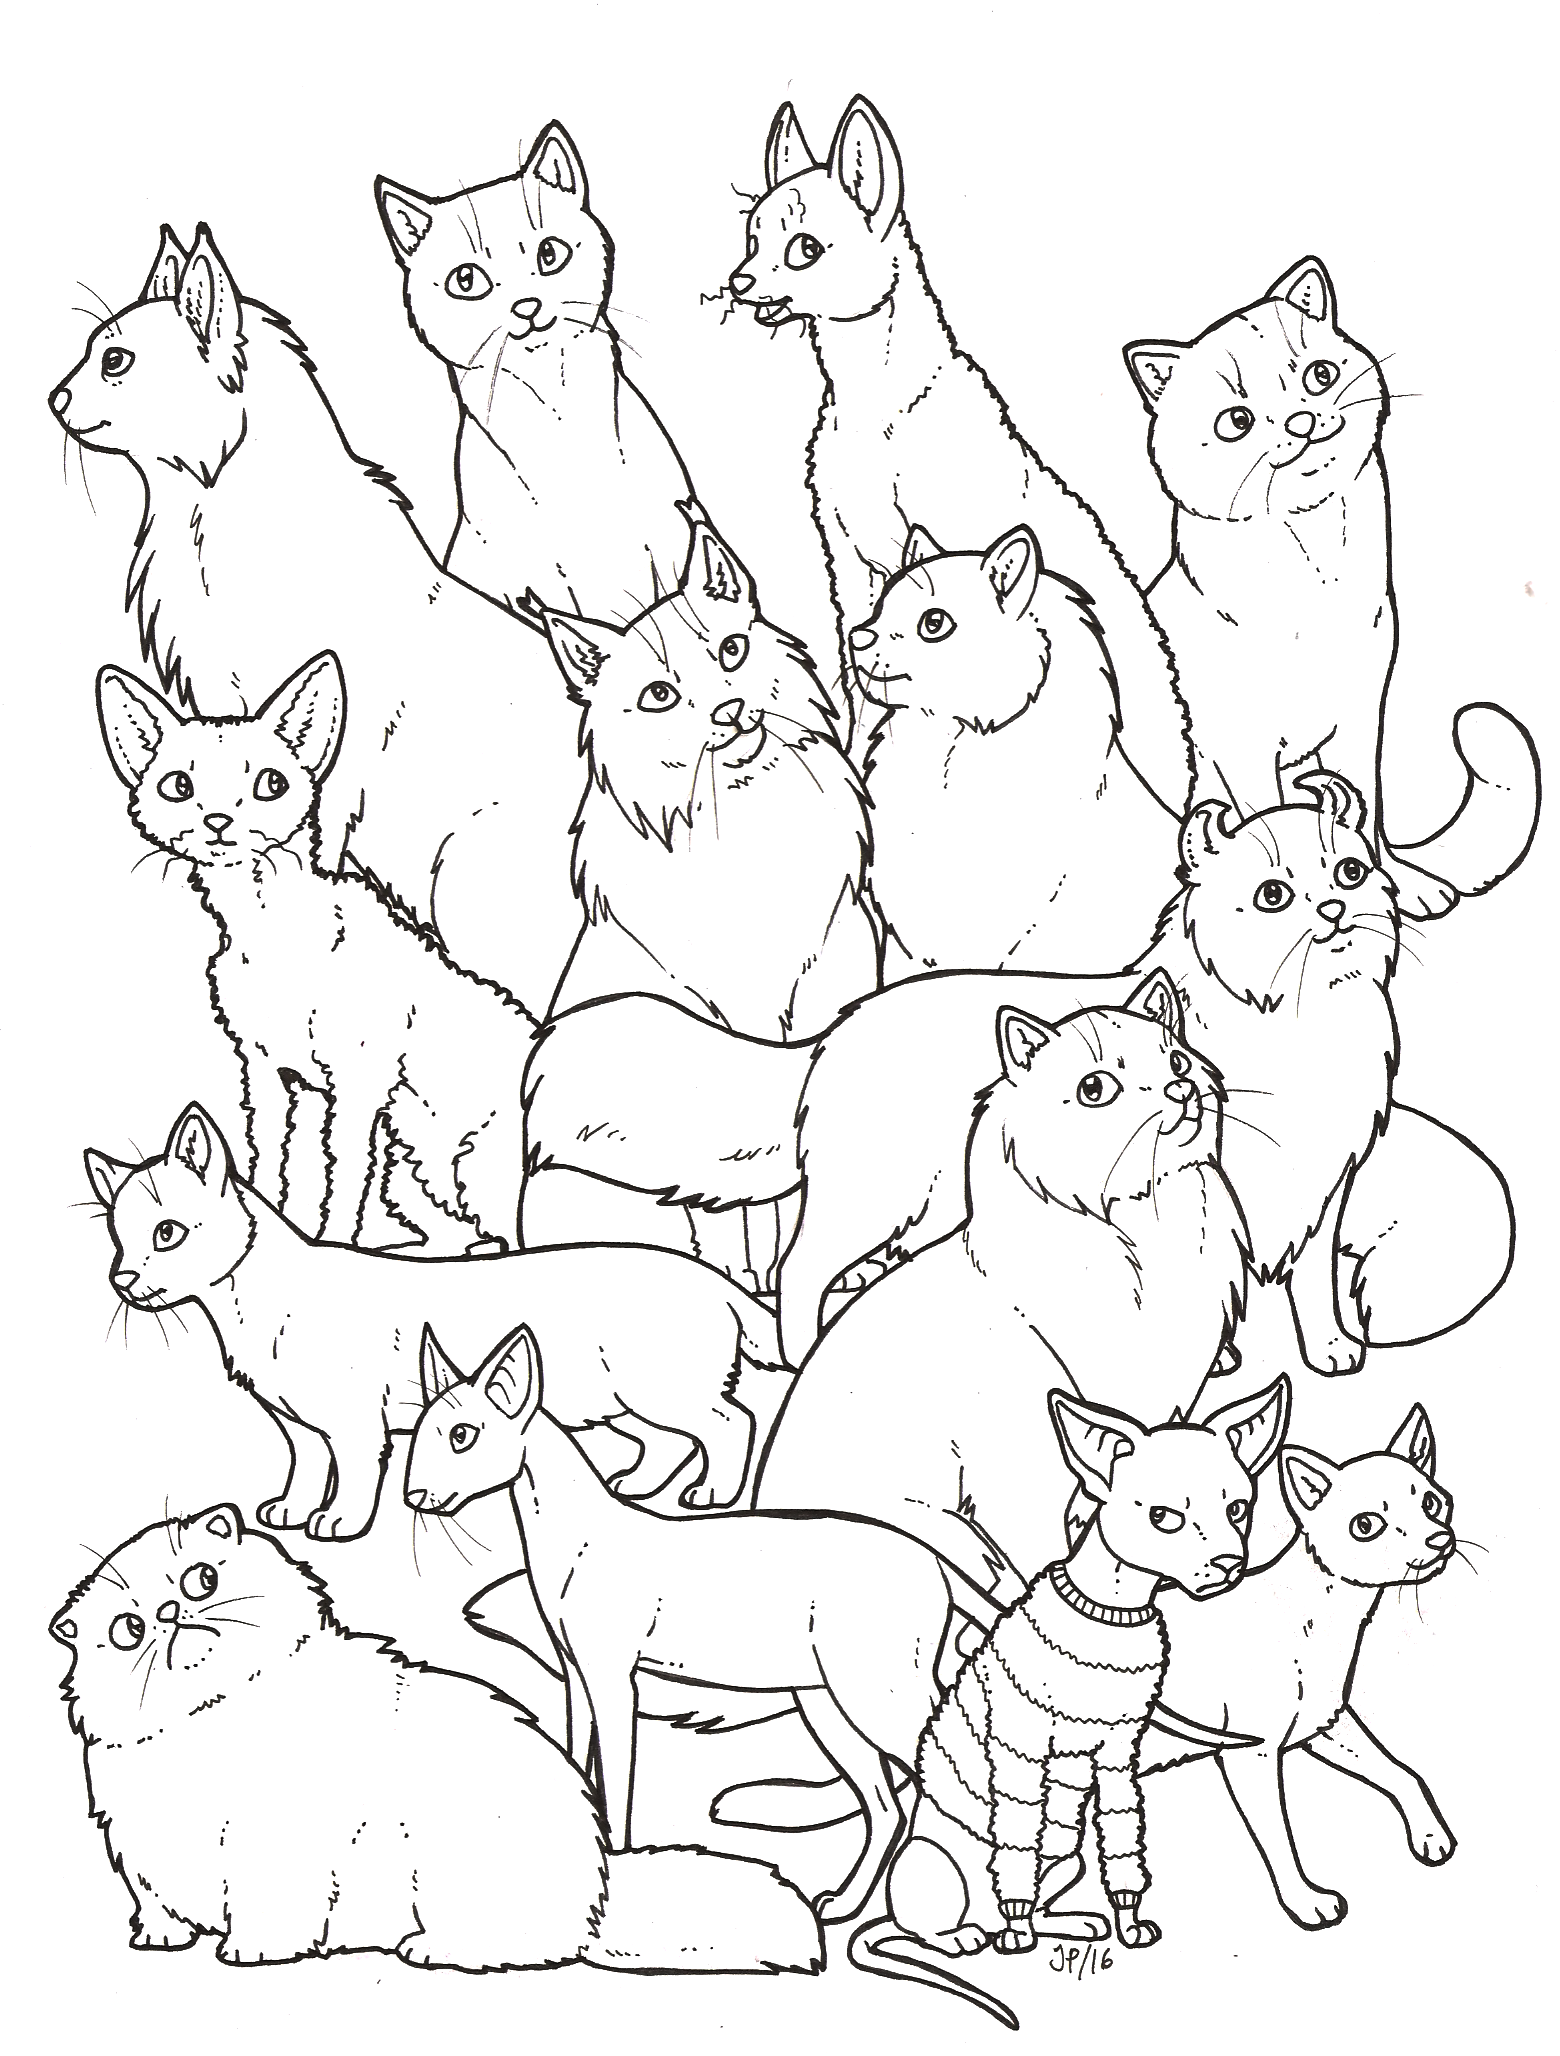 Cats colouring page by novablue on DeviantArt